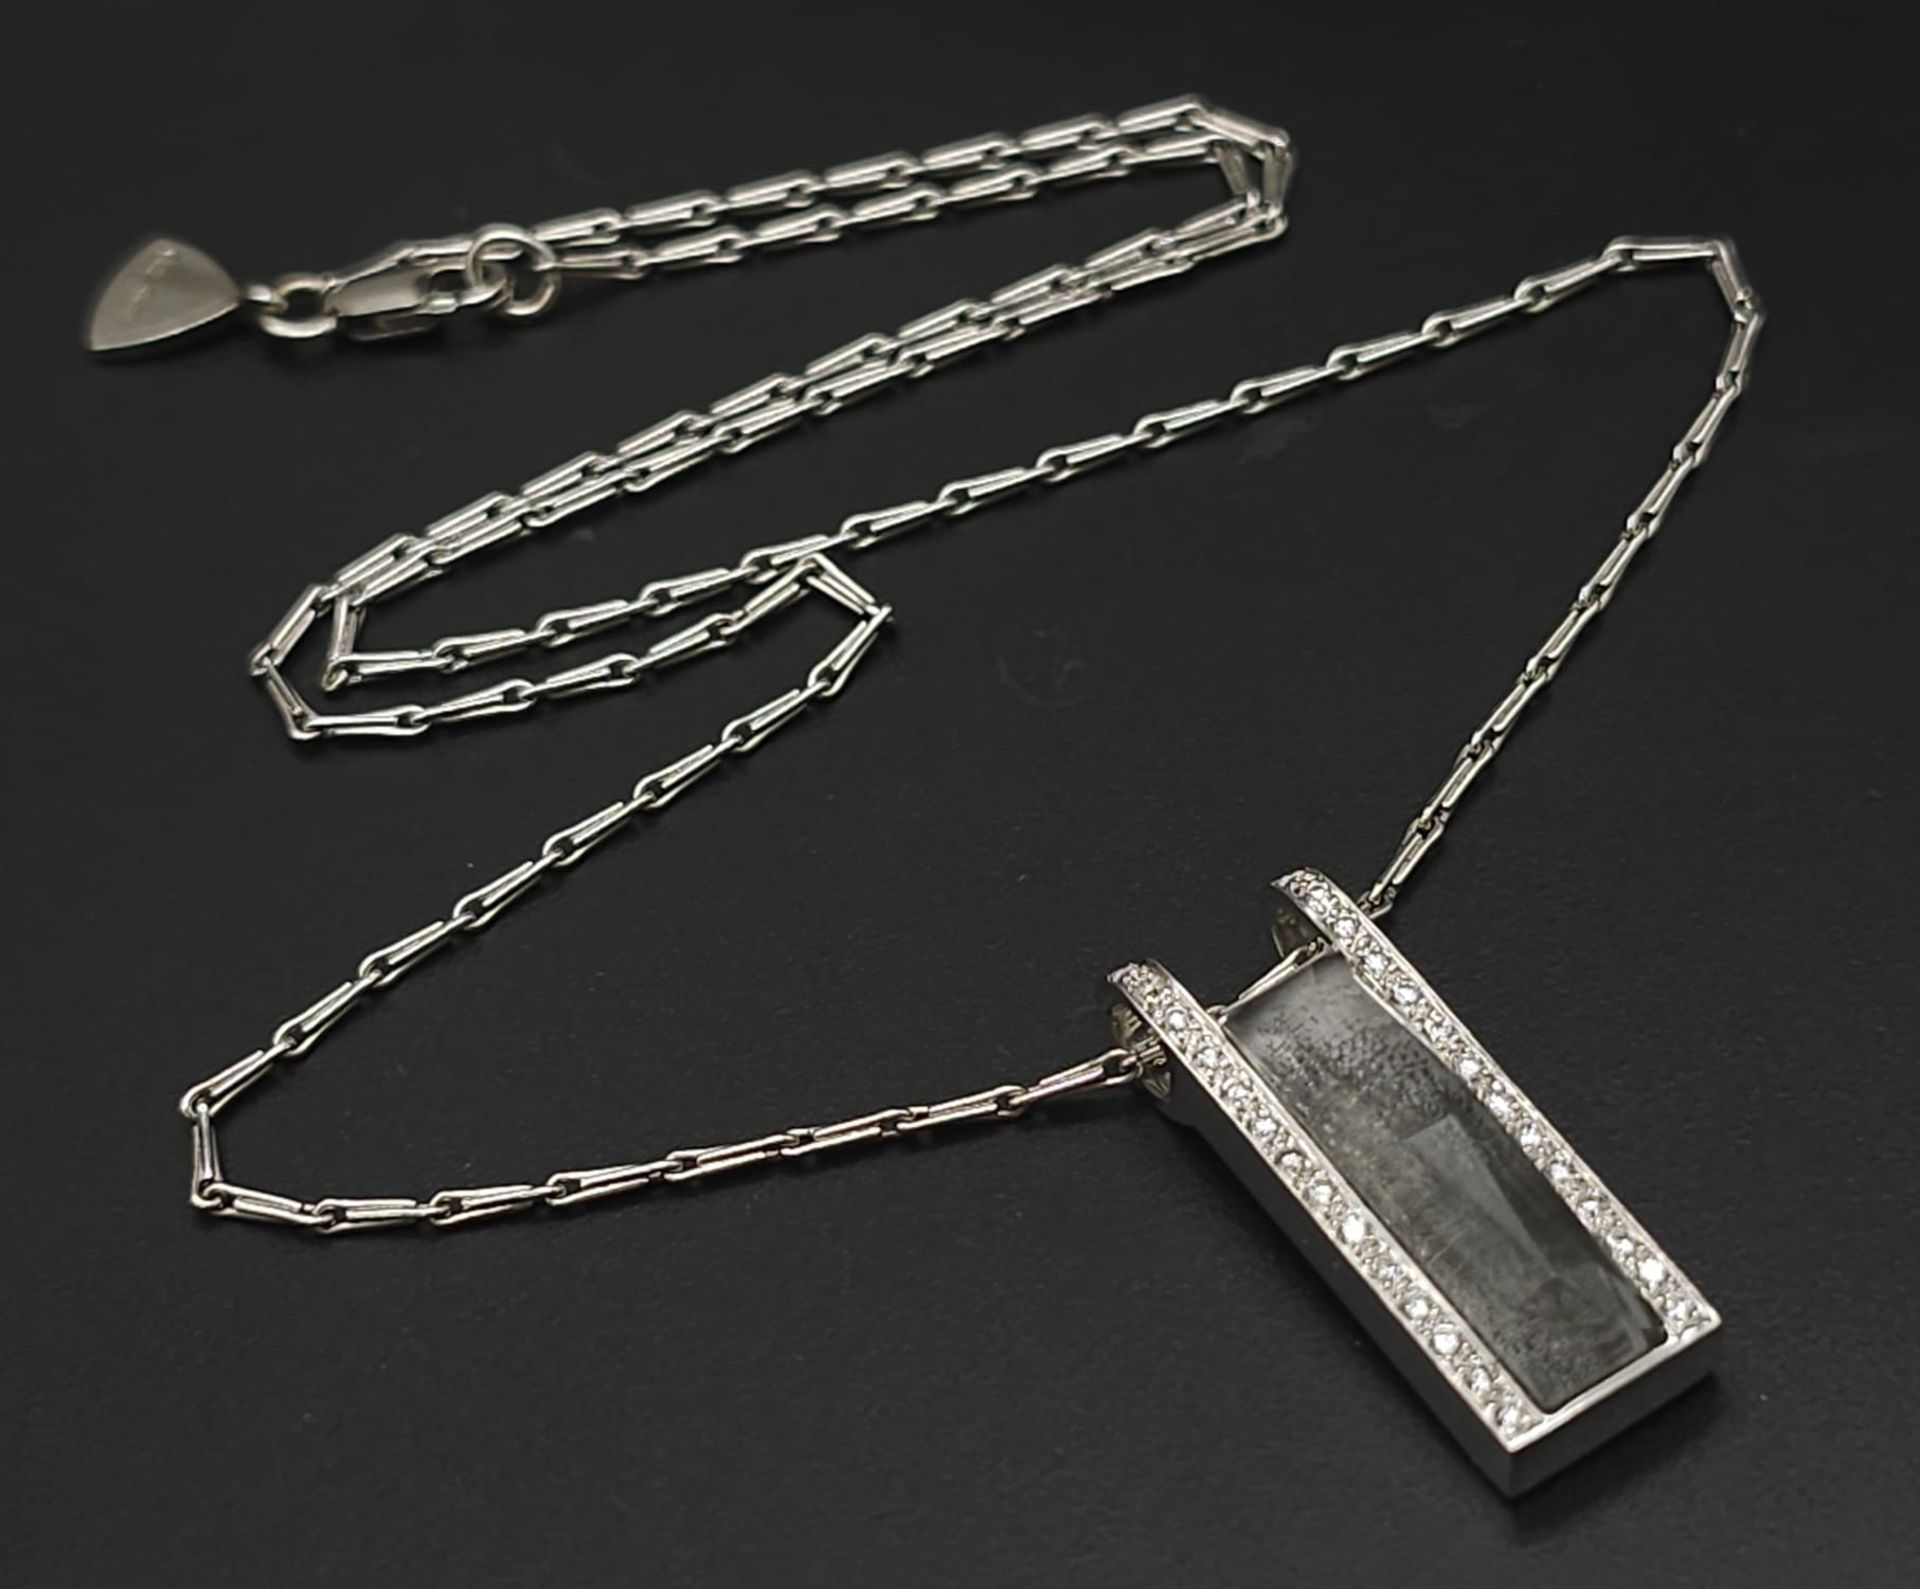 An 18K White Gold Rutilated Quartz and Diamond Pendant on an 18K White Gold Link Necklace. A